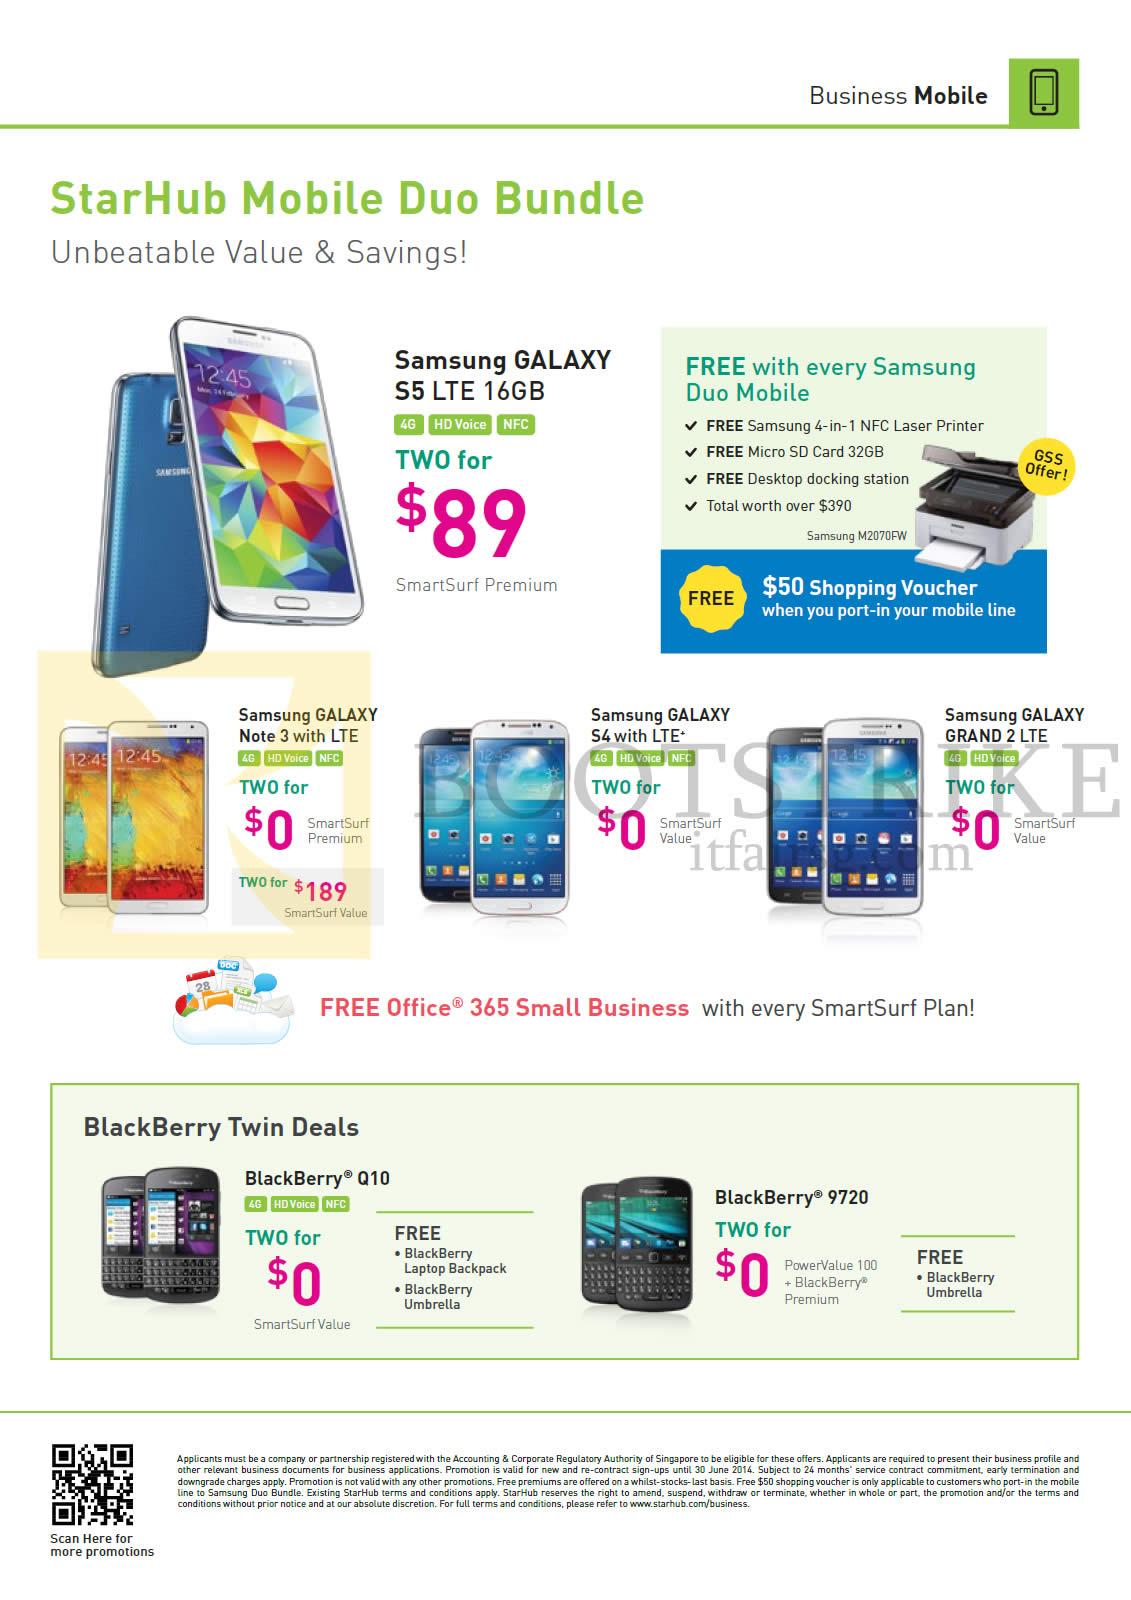 PC SHOW 2014 price list image brochure of Starhub Business Mobile Samsung Galaxy S5, Note 3, S4, Grand 2, Blackberry Q10, 9720